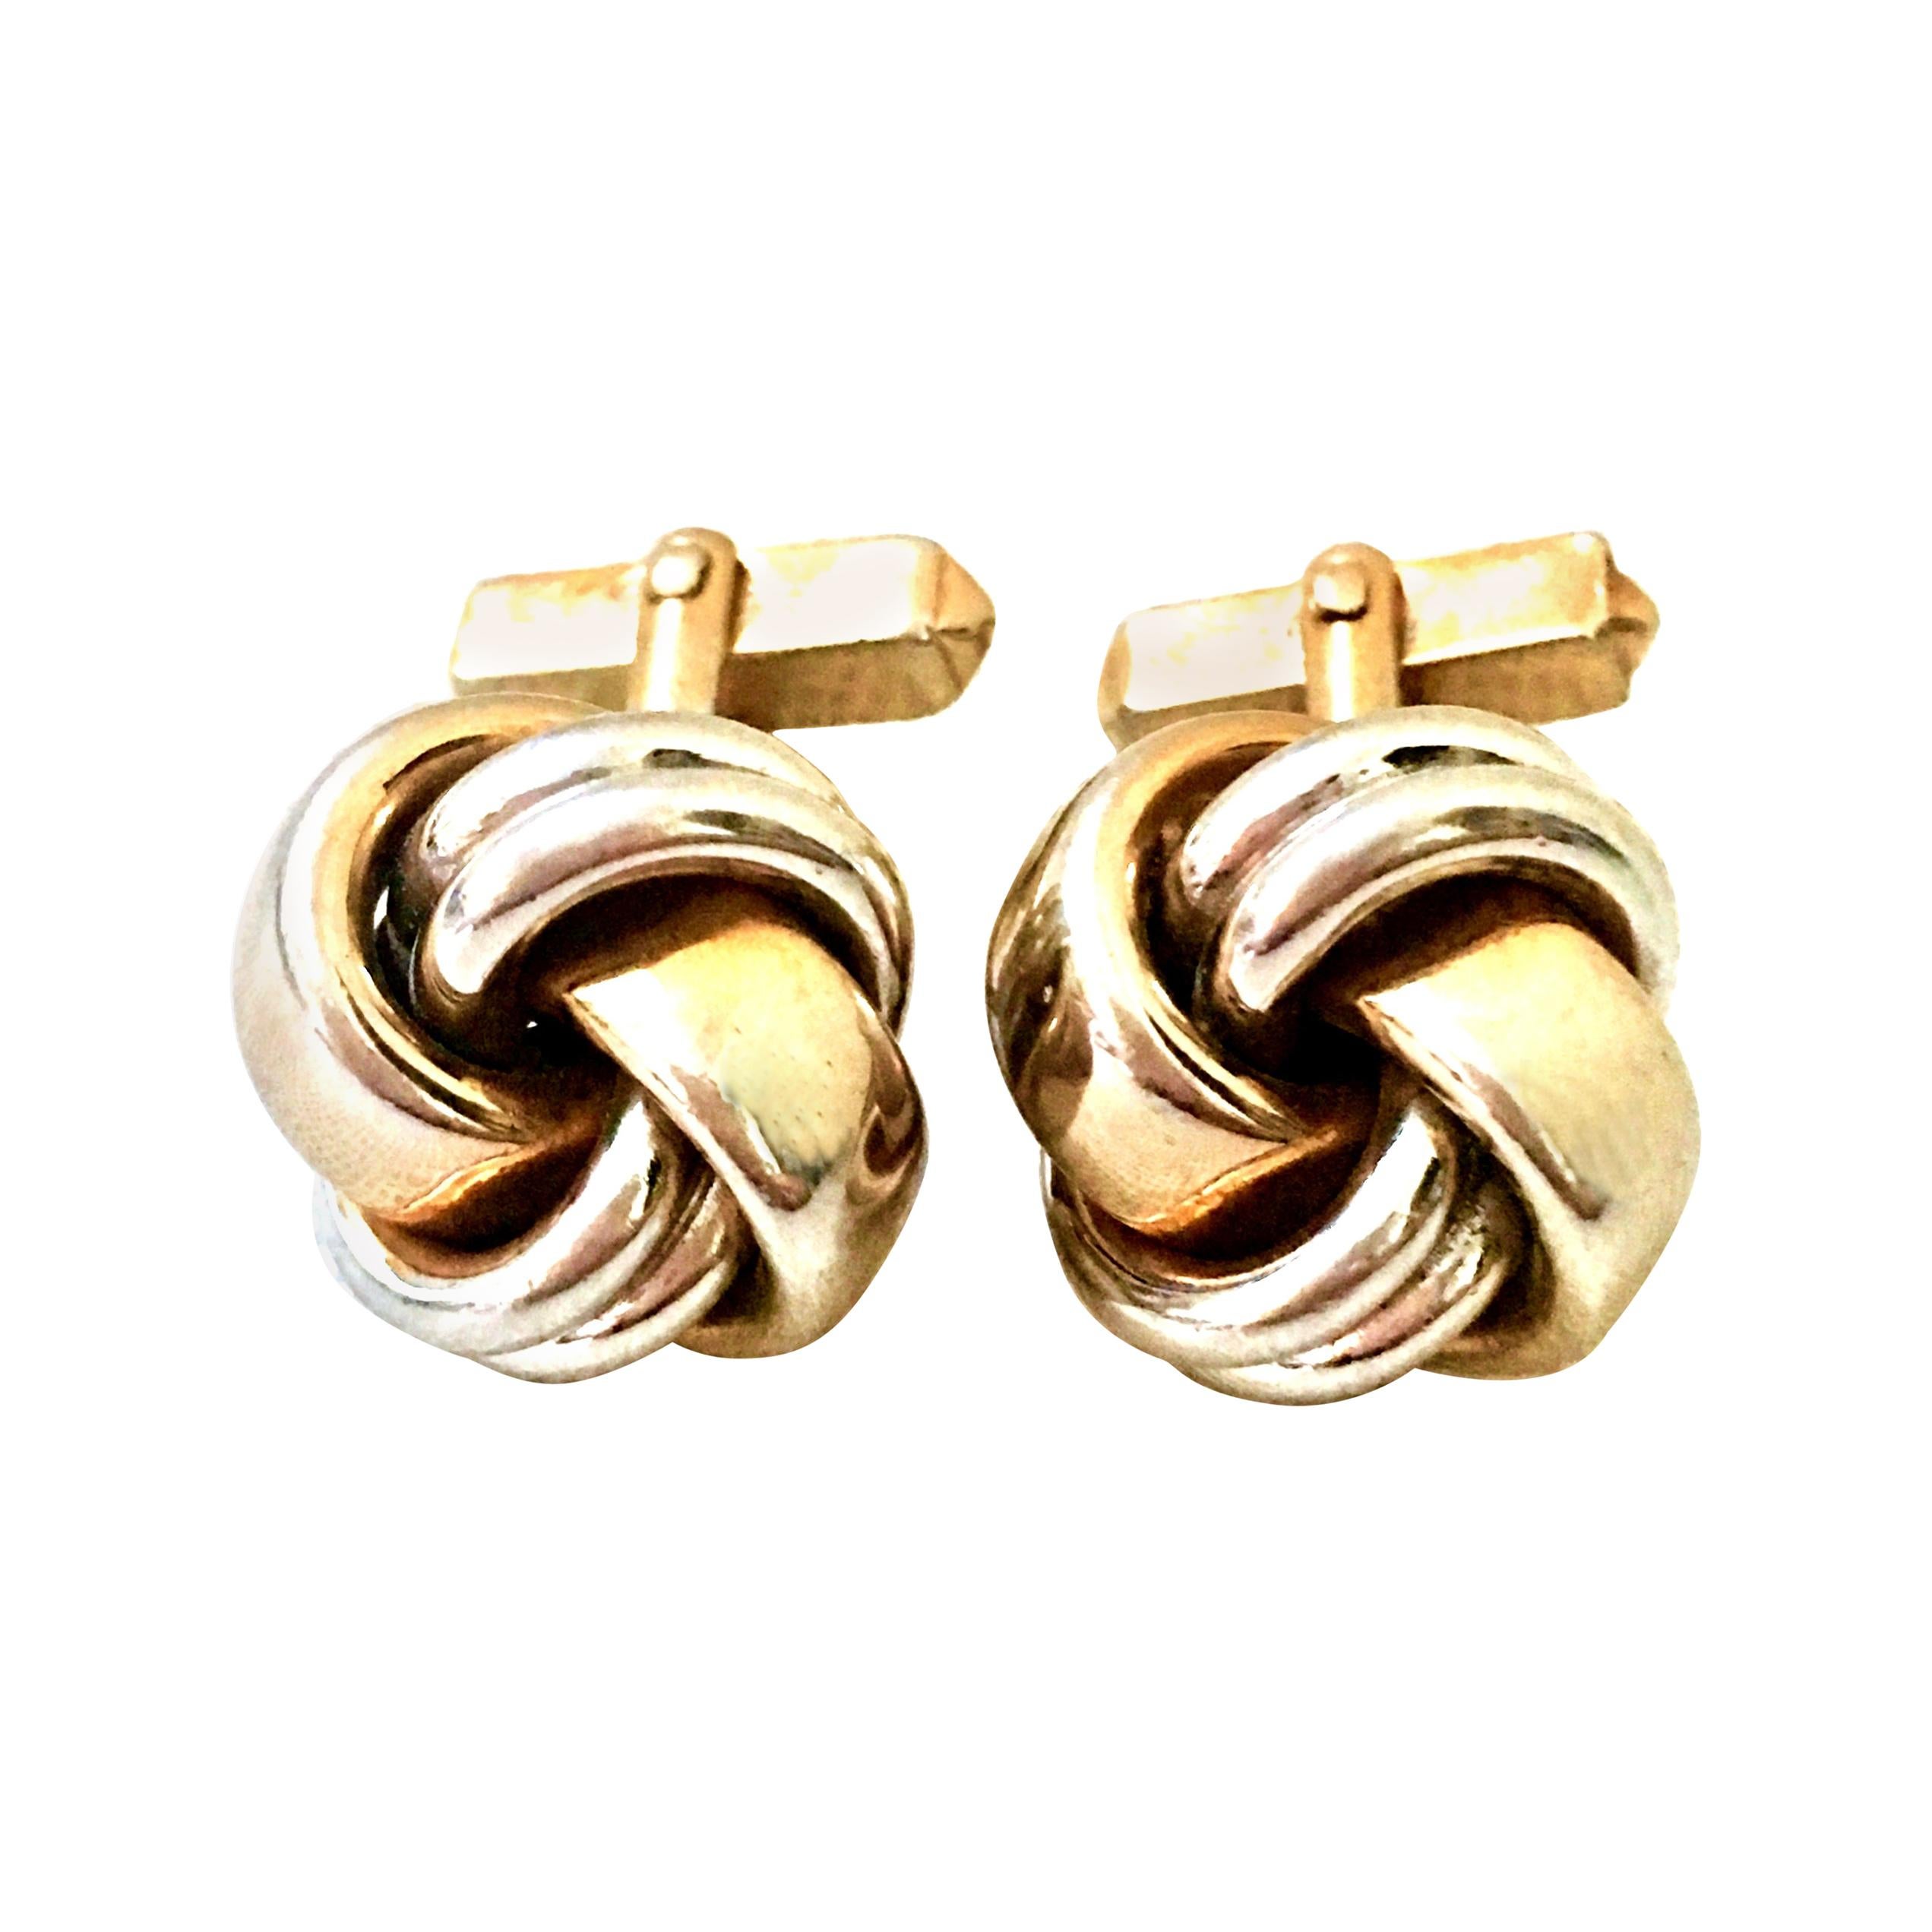 20th Century Pair Of Two Tone Silver & Gold "Love Knot" Cufflinks By, Swank For Sale